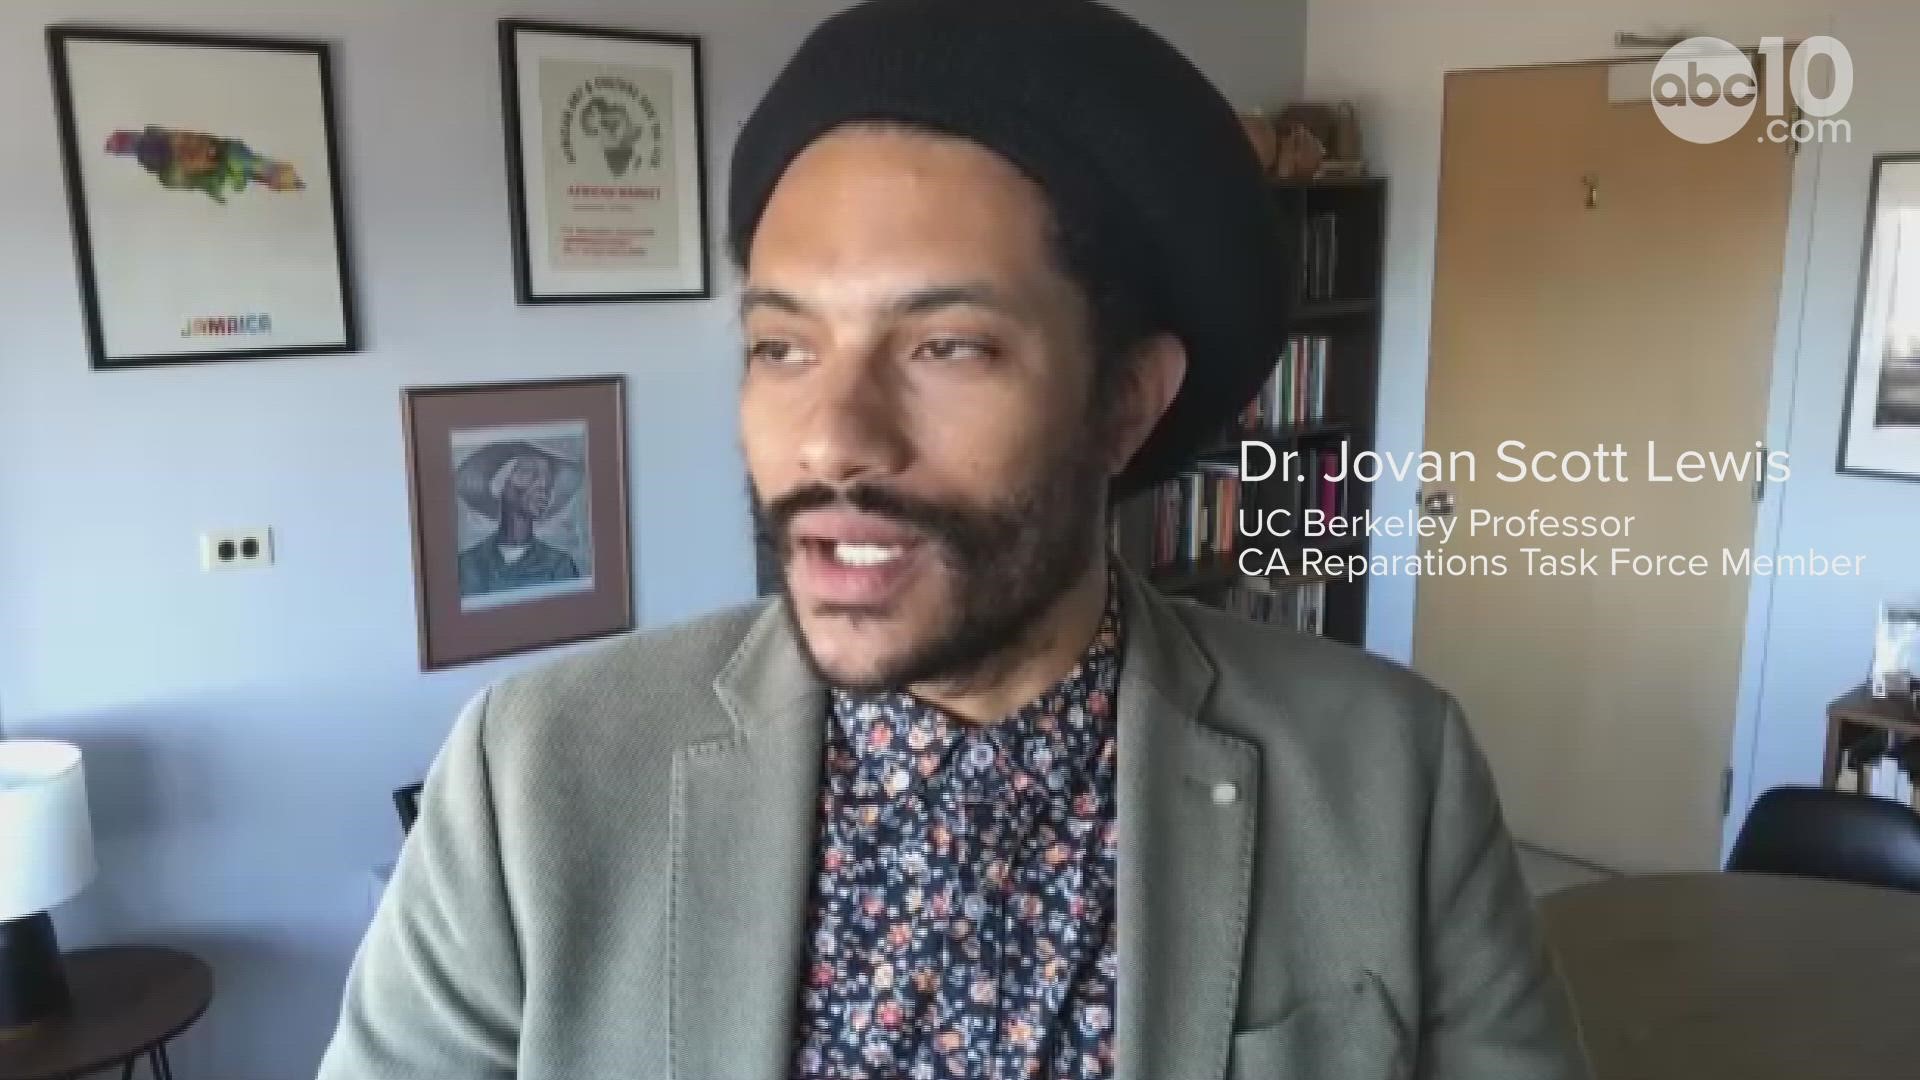 Dr. Jovan Scott Lewis – a UC Berkeley professor - discusses the groundbreaking report the task force is writing, the first part due this June.